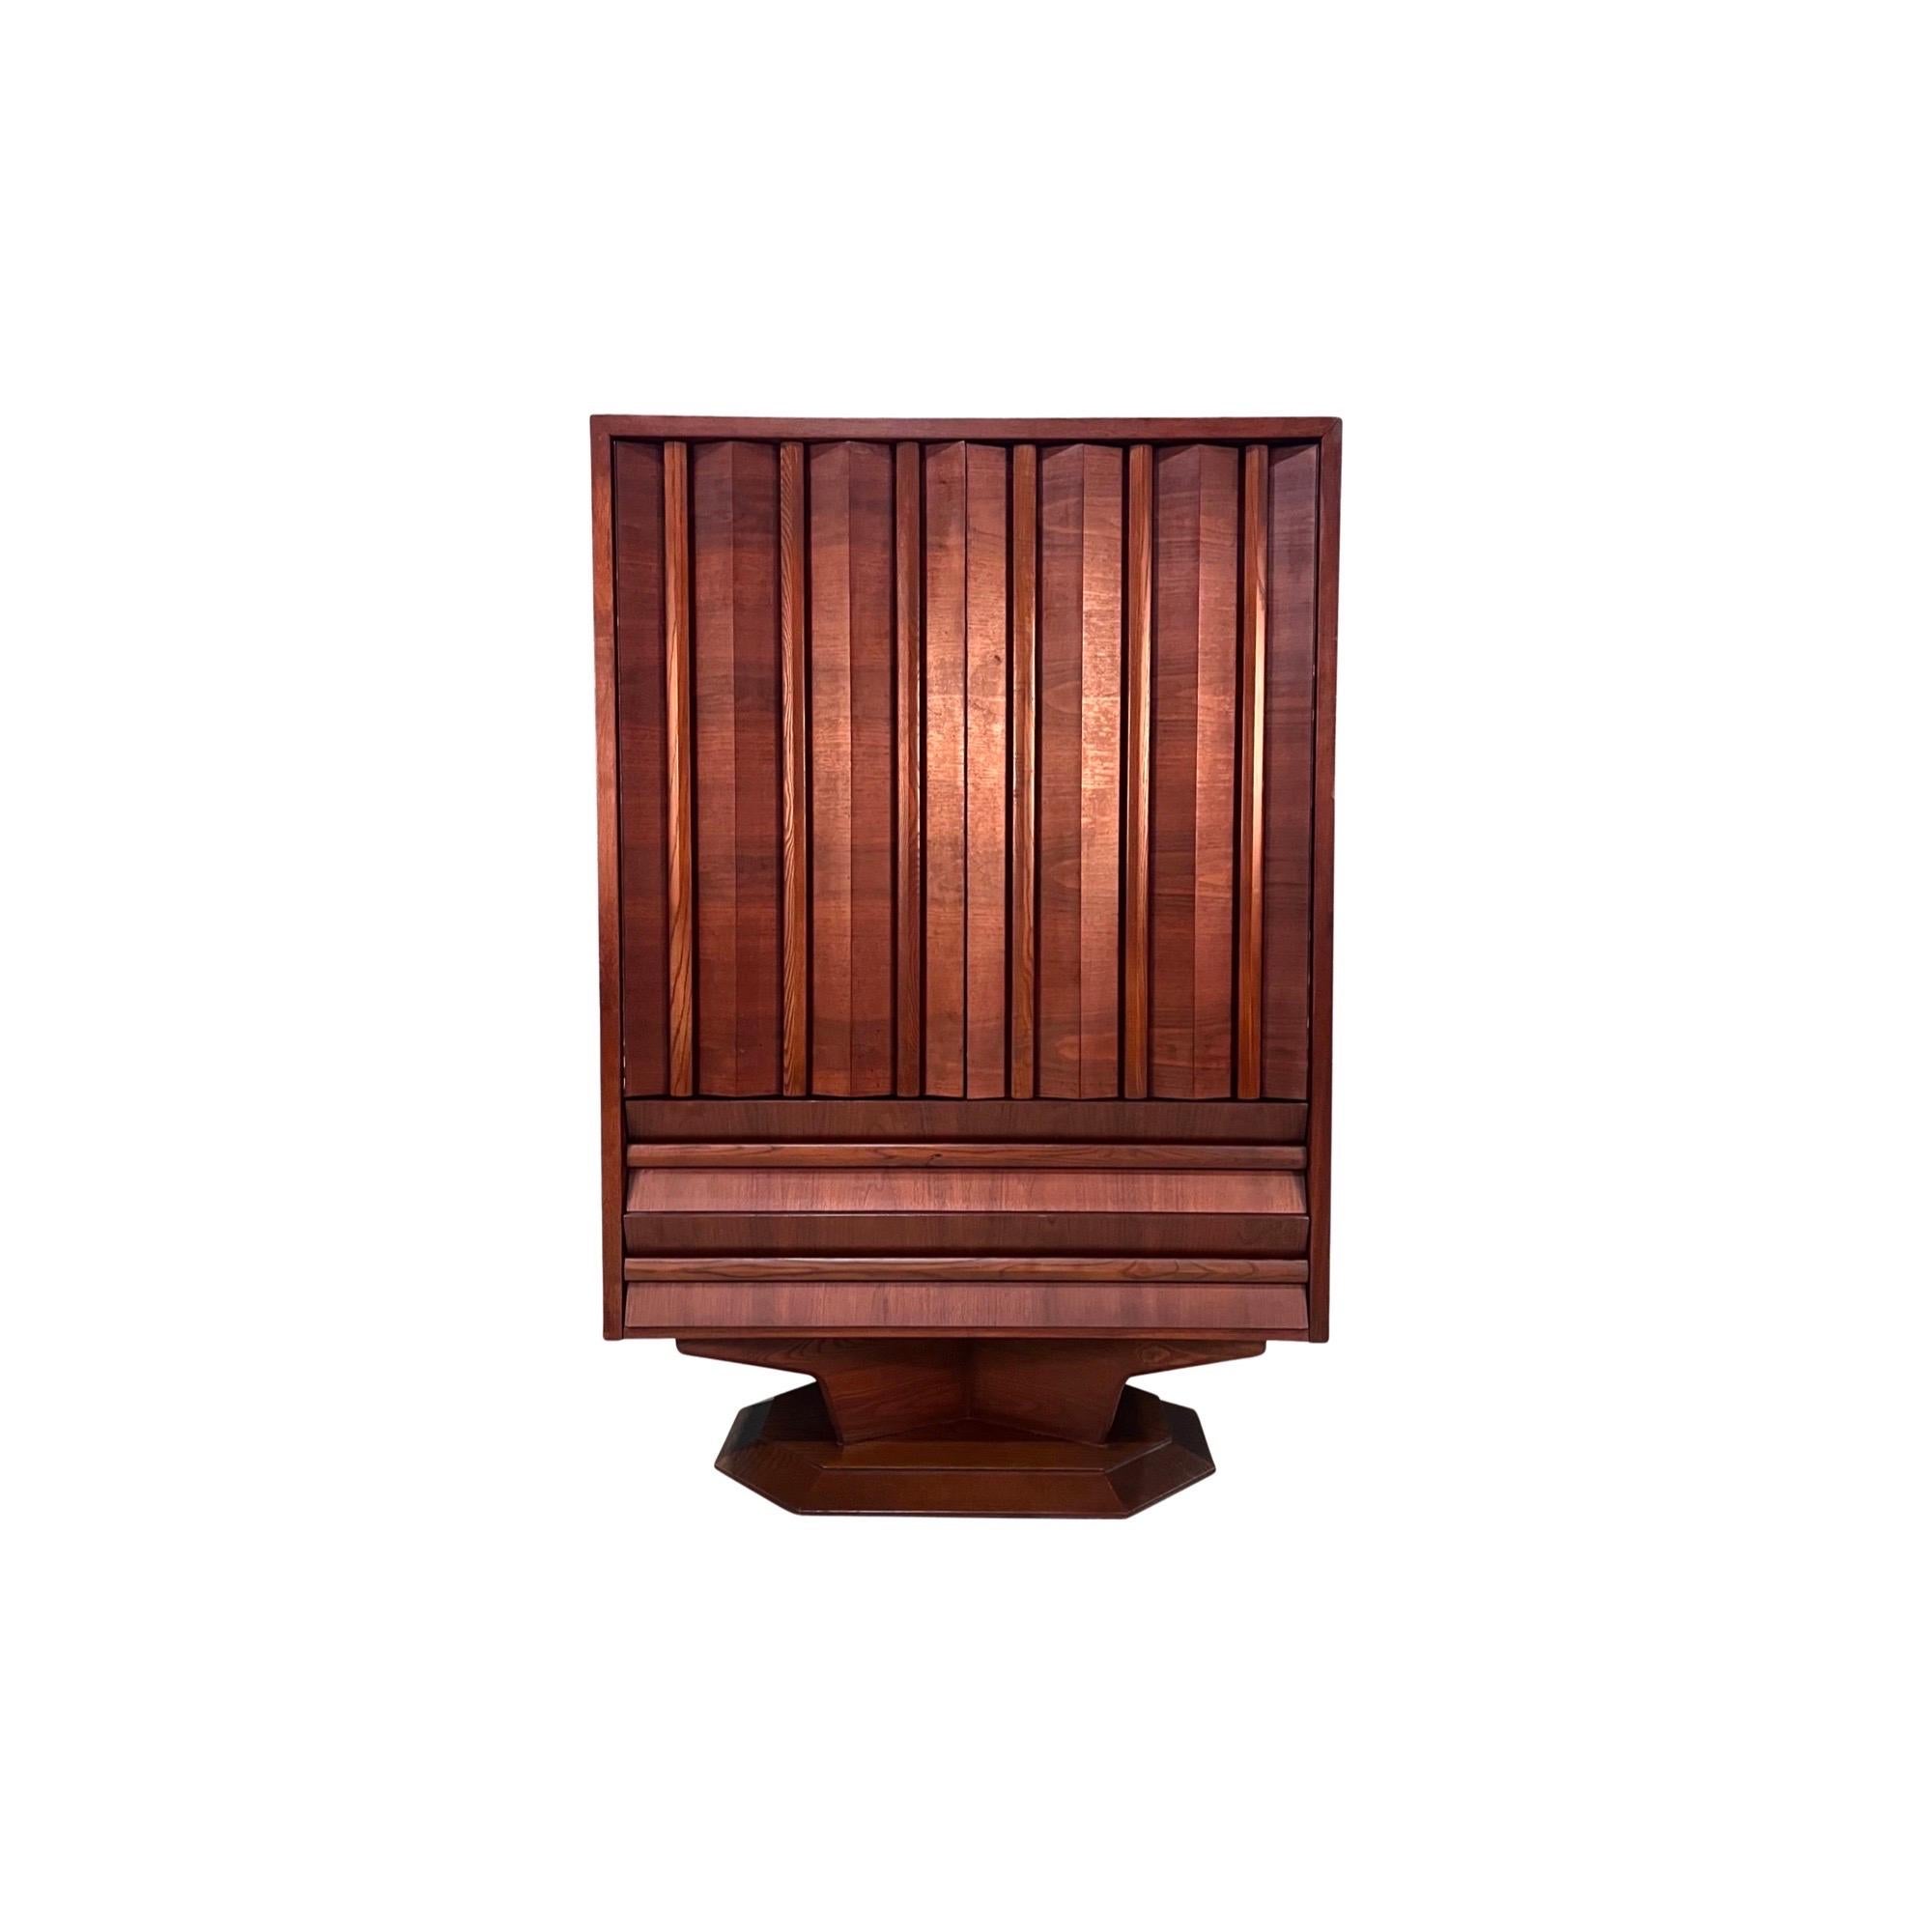 This is a unique walnut dresser with an octagonal base and pleated doors and drawer fronts. This dresser has ample storage: two lower drawers underneath the doors of this highboy armoire which open to four pullout drawers on the left and two